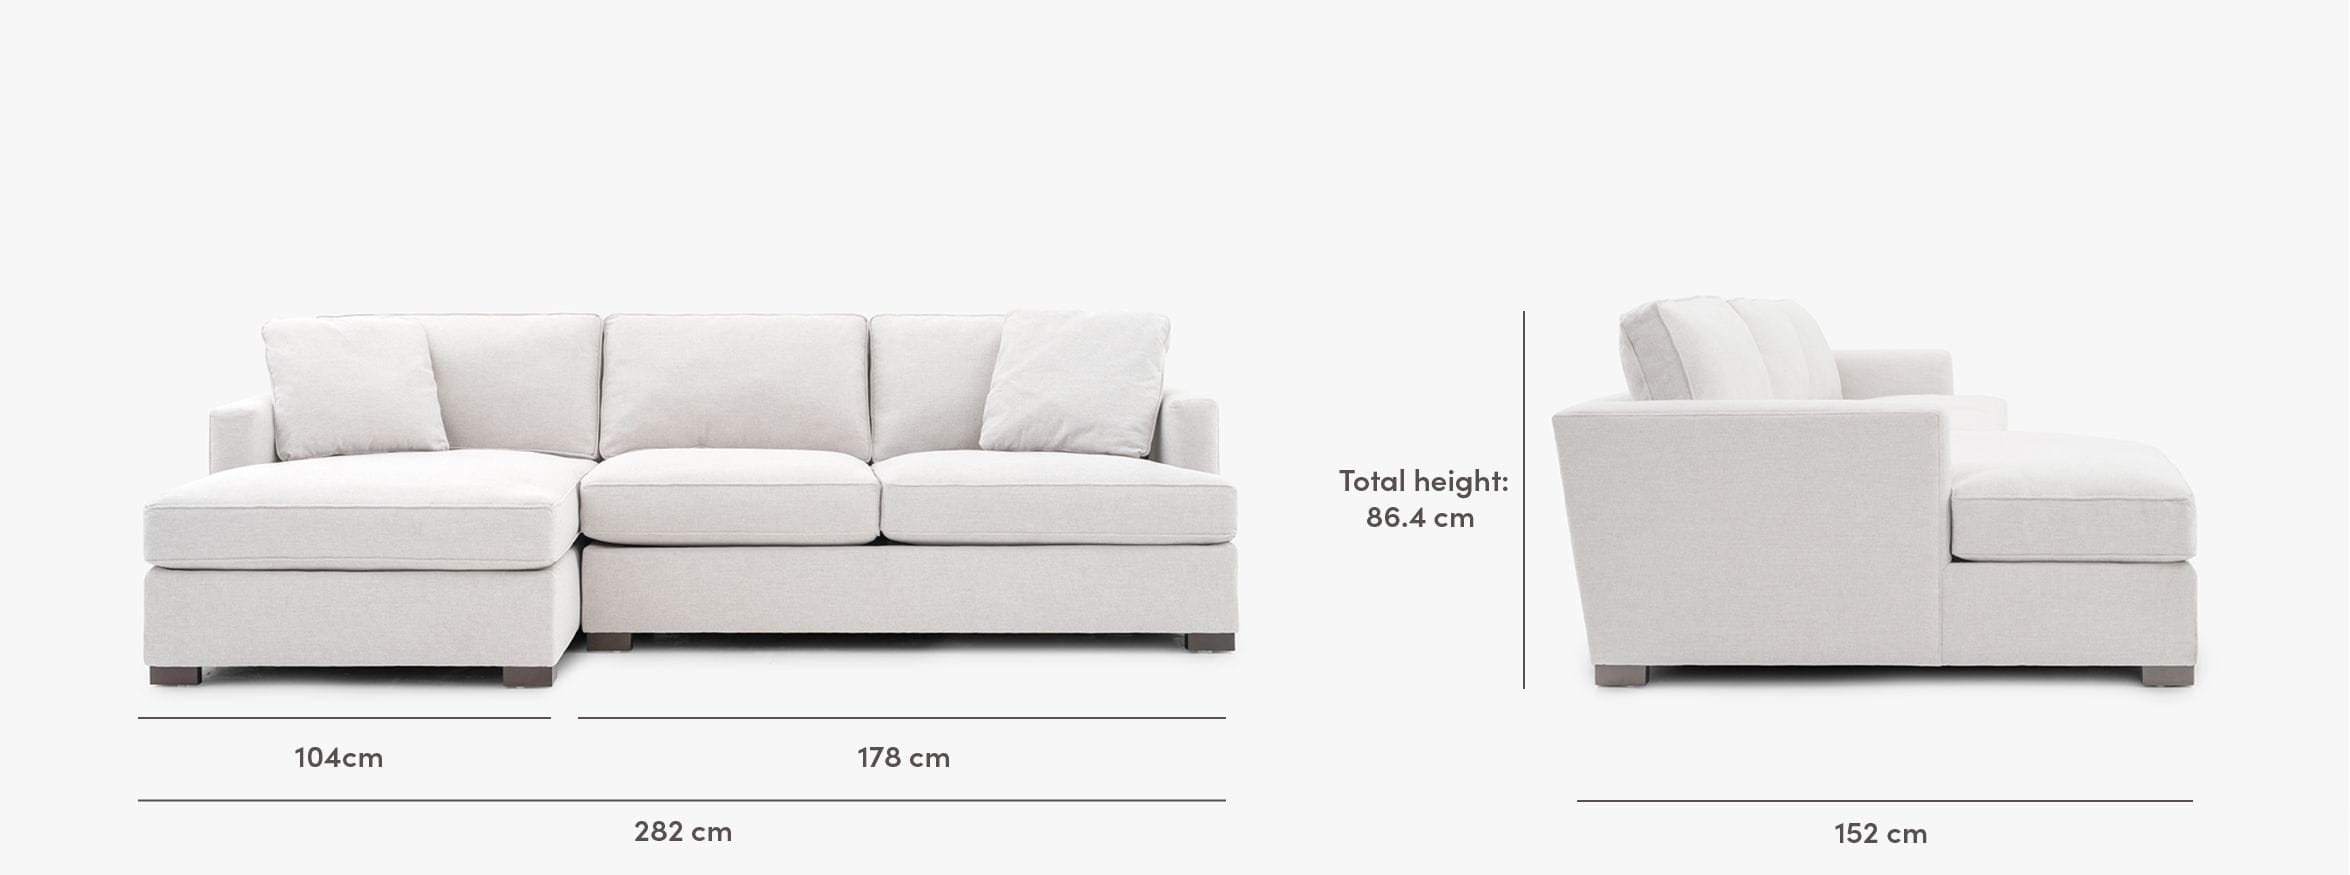 Sloan sectional dimensions